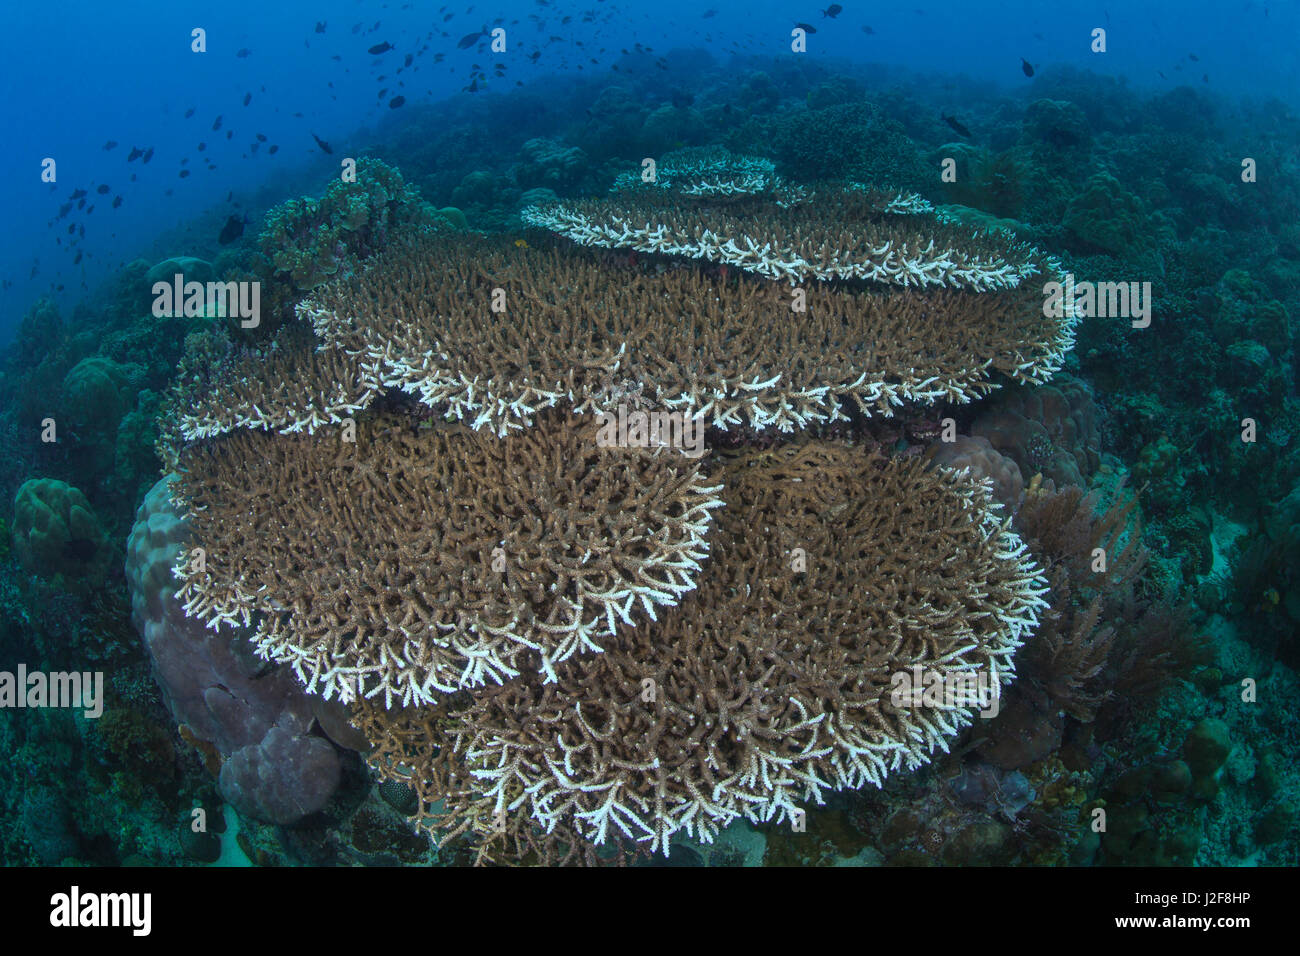 Acropora sp coral expand as layered stacks of tables over a wide area of the sea floor. Bunaken Island, Indonesia. Stock Photo